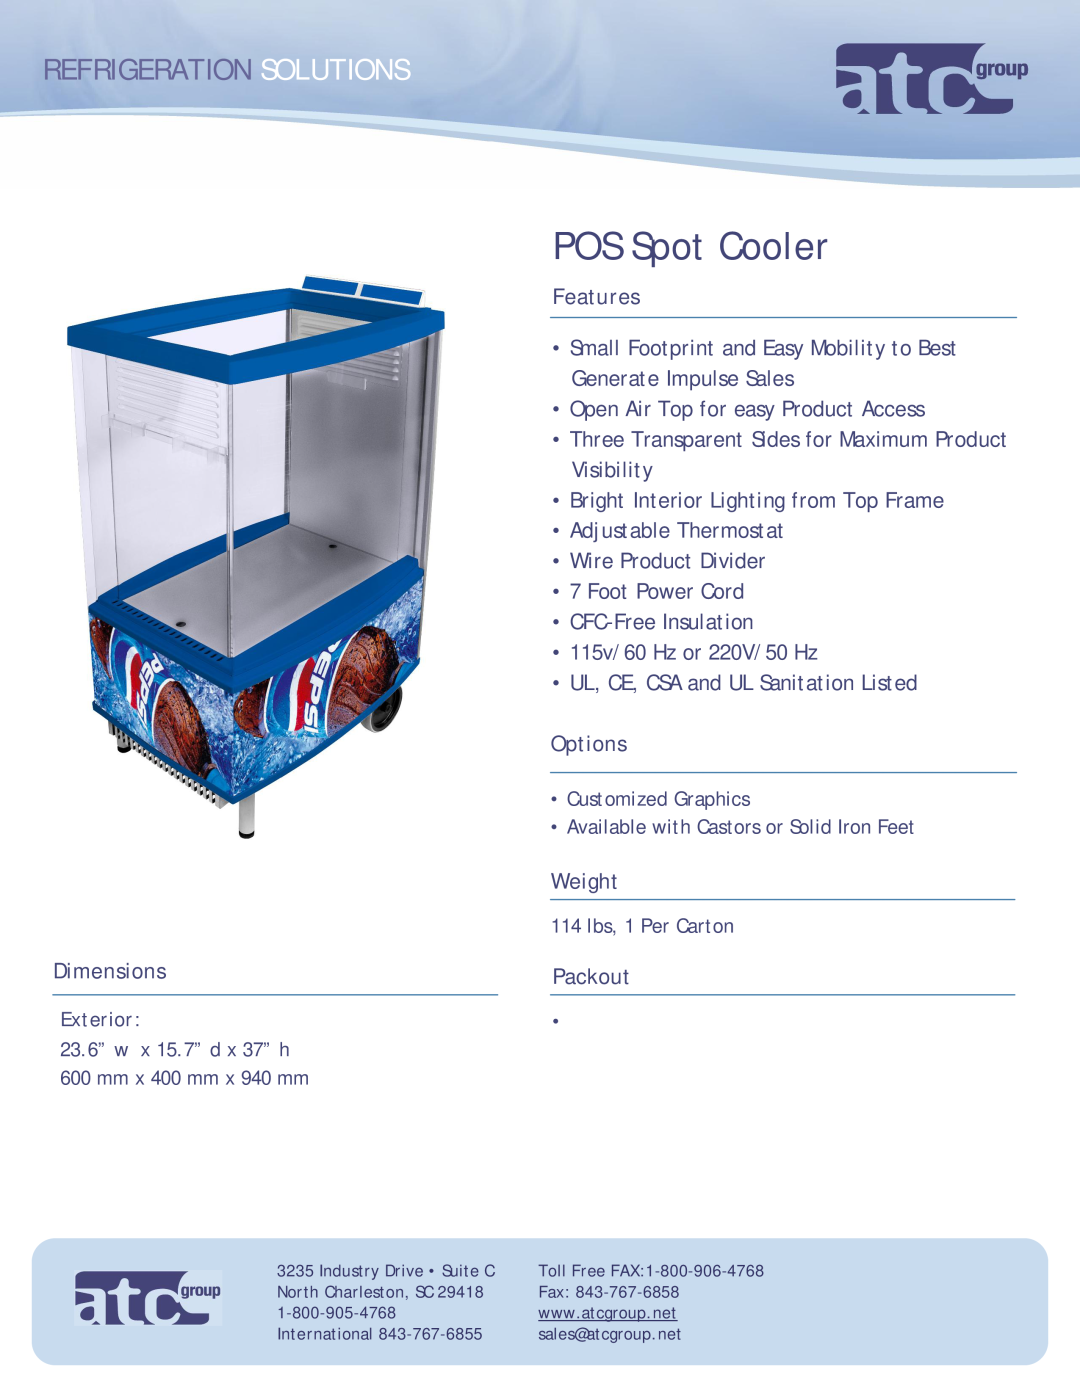 ATC Group dimensions POS Spot Cooler, Refrigeration Solutions, Dimensions, Features, Options, Weight, Packout 